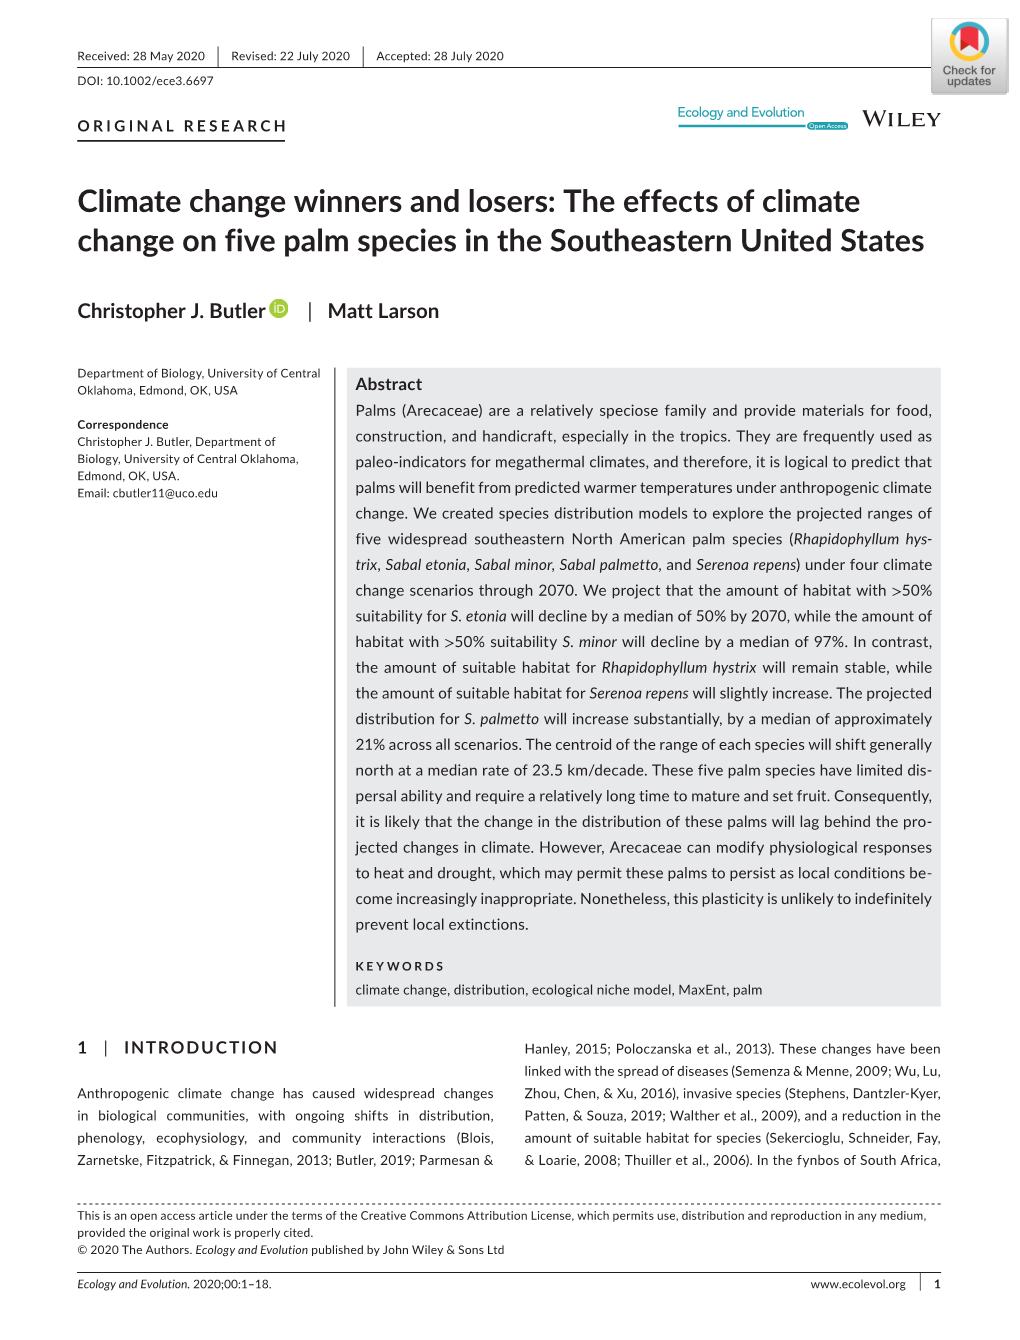 Climate Change Winners and Losers: the Effects of Climate Change on Five Palm Species in the Southeastern United States